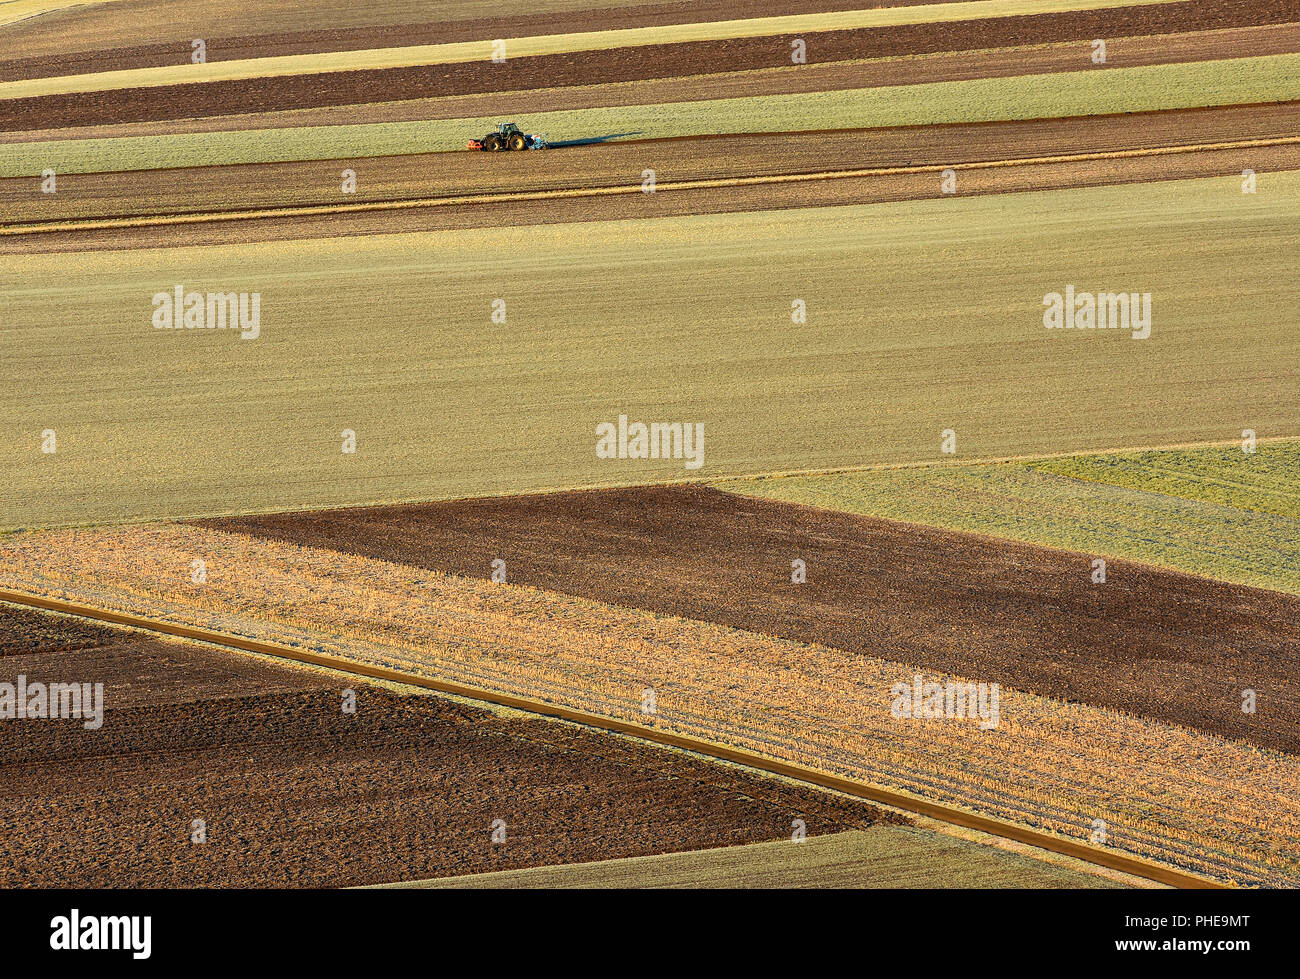 Traktor; Field; tractor; ploughing; agrarian surfaces; Stock Photo